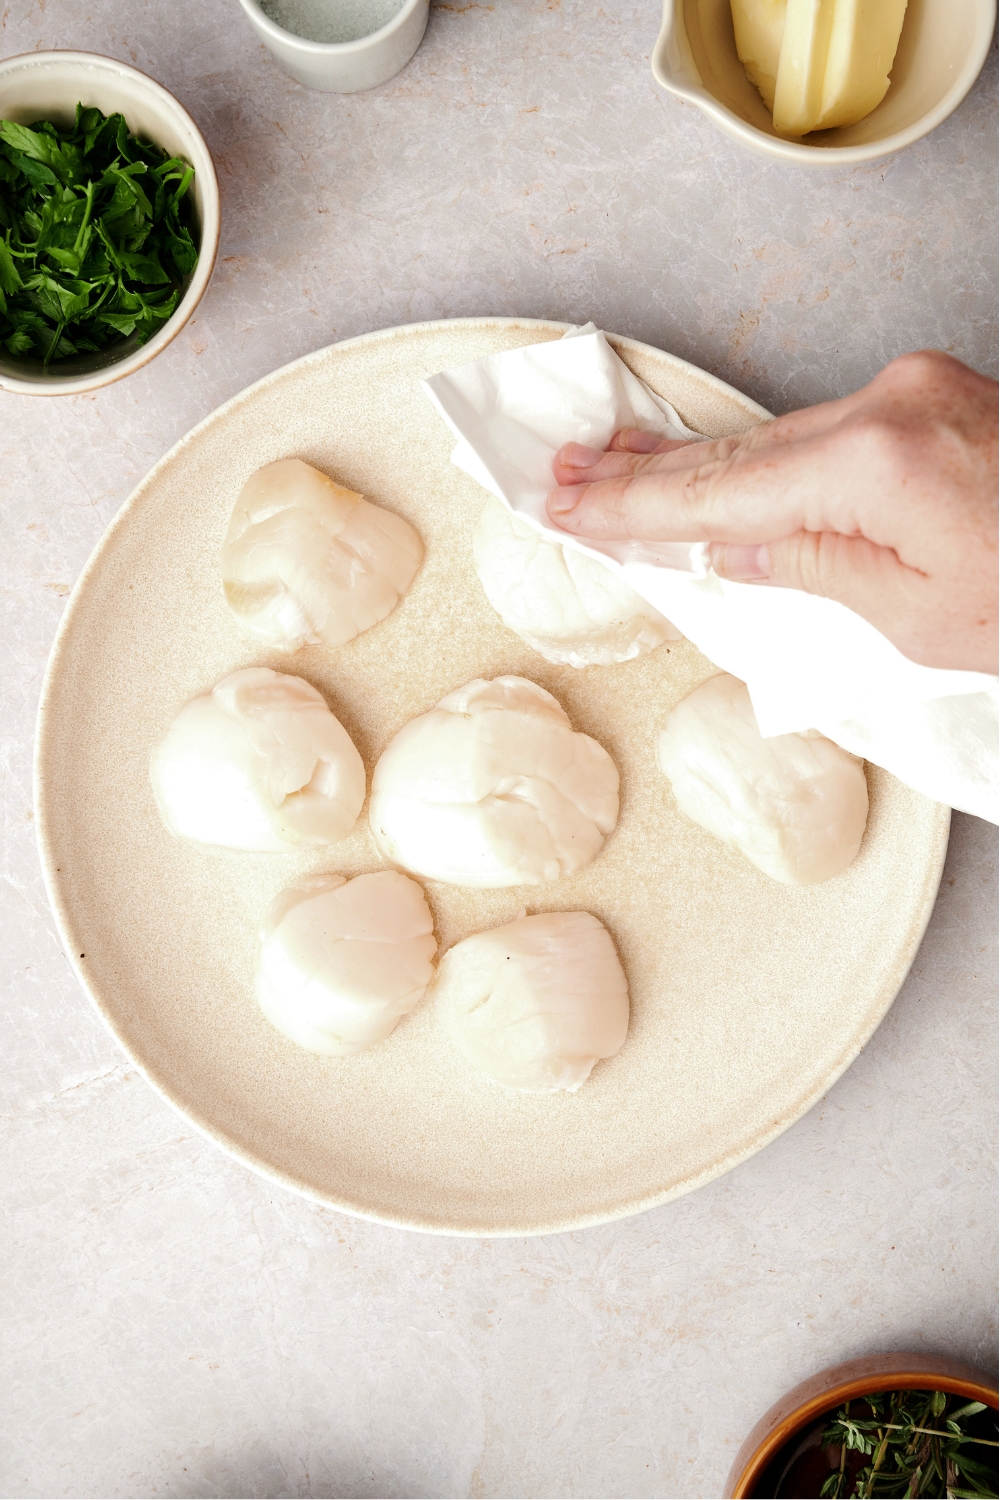 A hand patting scallops with a paper towel.